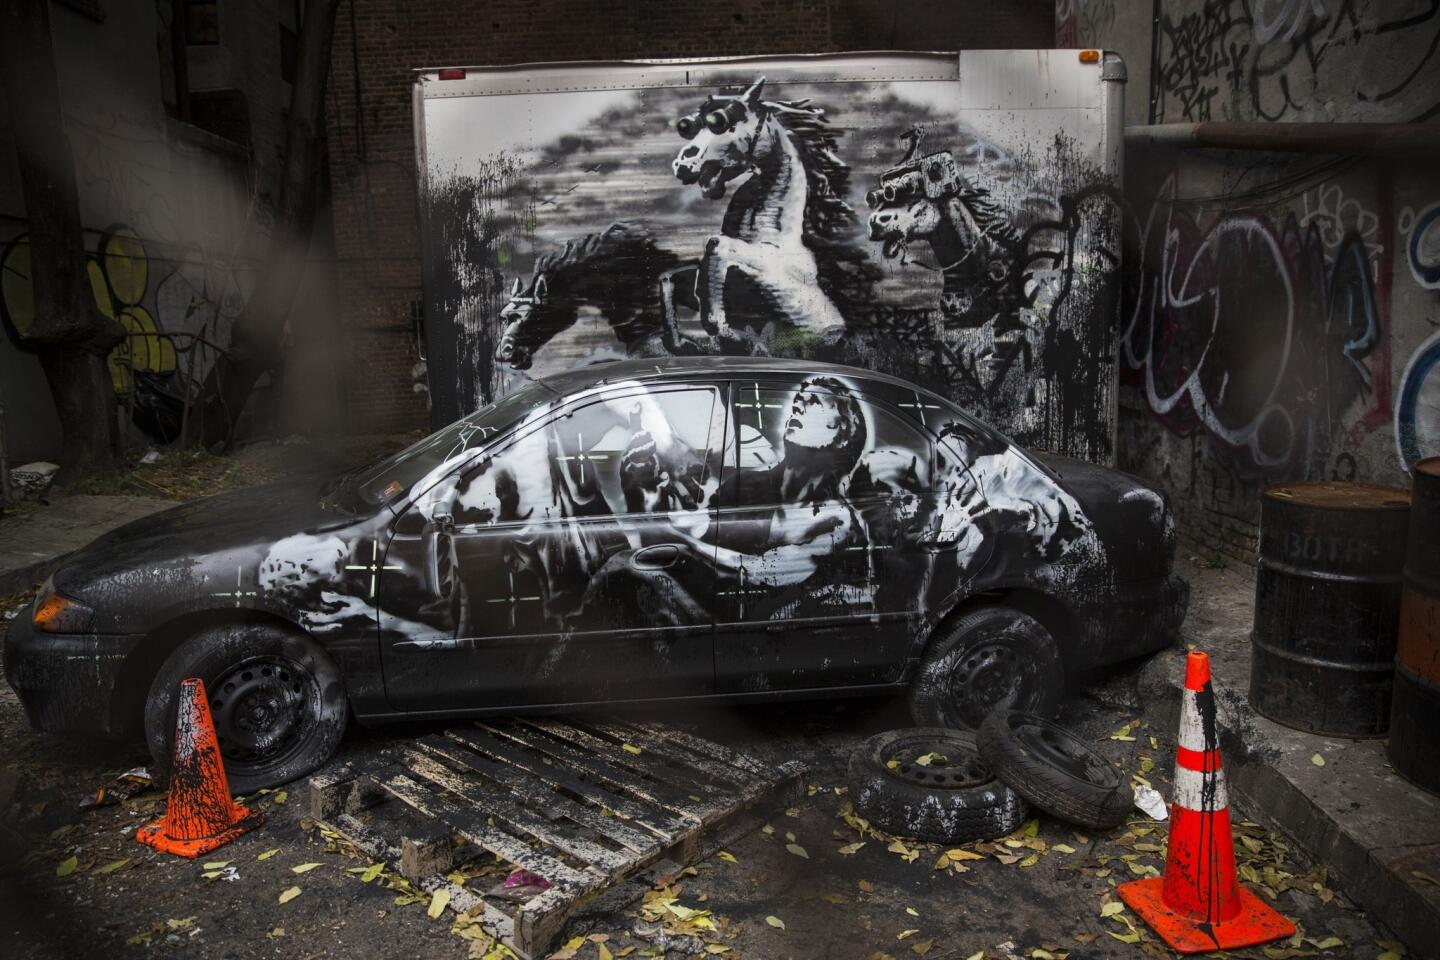 Seen through a fence in New York City, Banksy's trio of stampeding horses wear night-vision goggles while a group of men kneel before them. A tape recording of a 2007 U.S. airstrike plays in the background, revealing the killing of two children and a Reuters journalist.